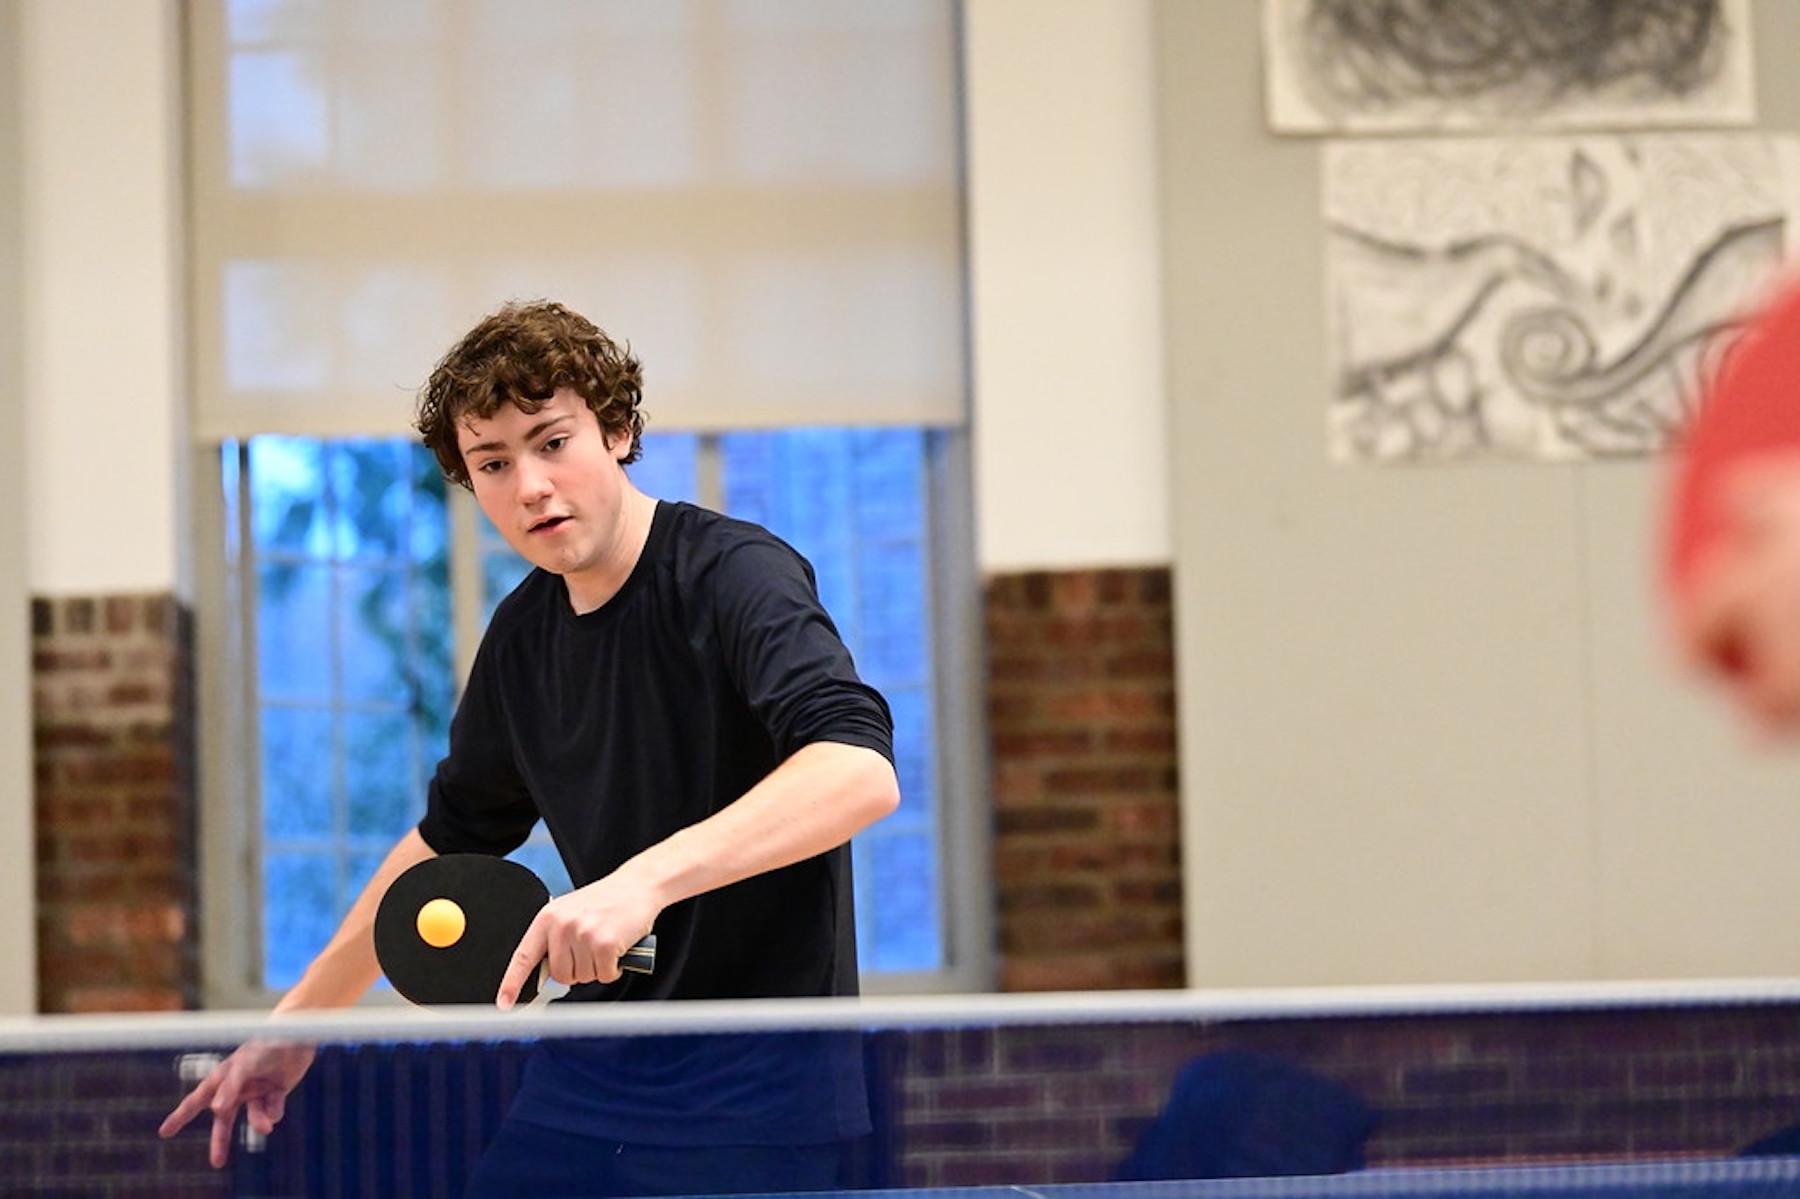 Fieldston Upper student practices table tennis in the Student Commons.